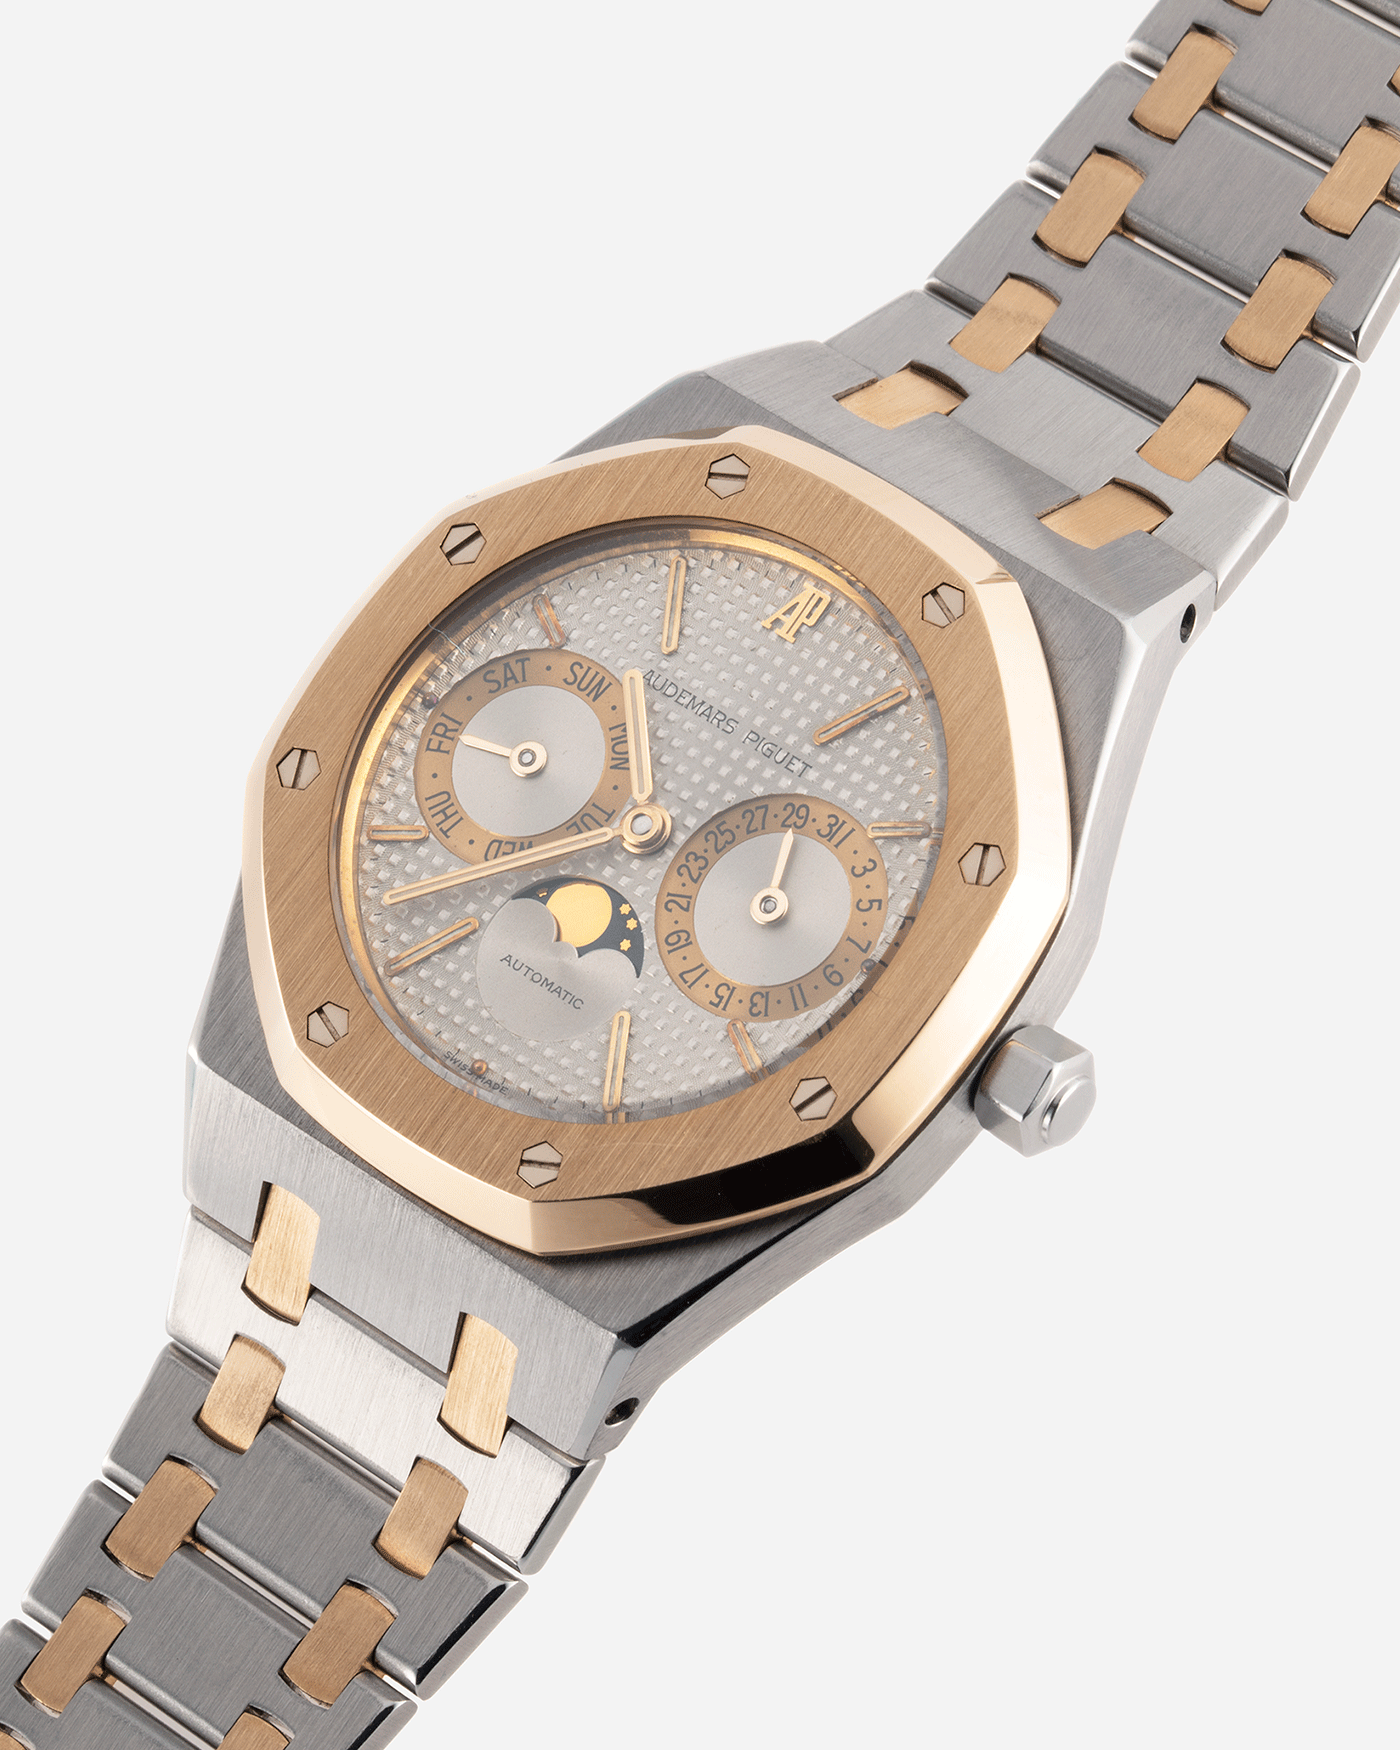 Brand: Audemars Piguet Year: 1980’s Model: Royal Oak Reference Number: 25594 Material: Stainless Steel and 18k Yellow Gold Movement: Cal 2124 Case Diameter: 36mm Bracelet: Audemars Piguet Stainless Steel Integrated Bracelet